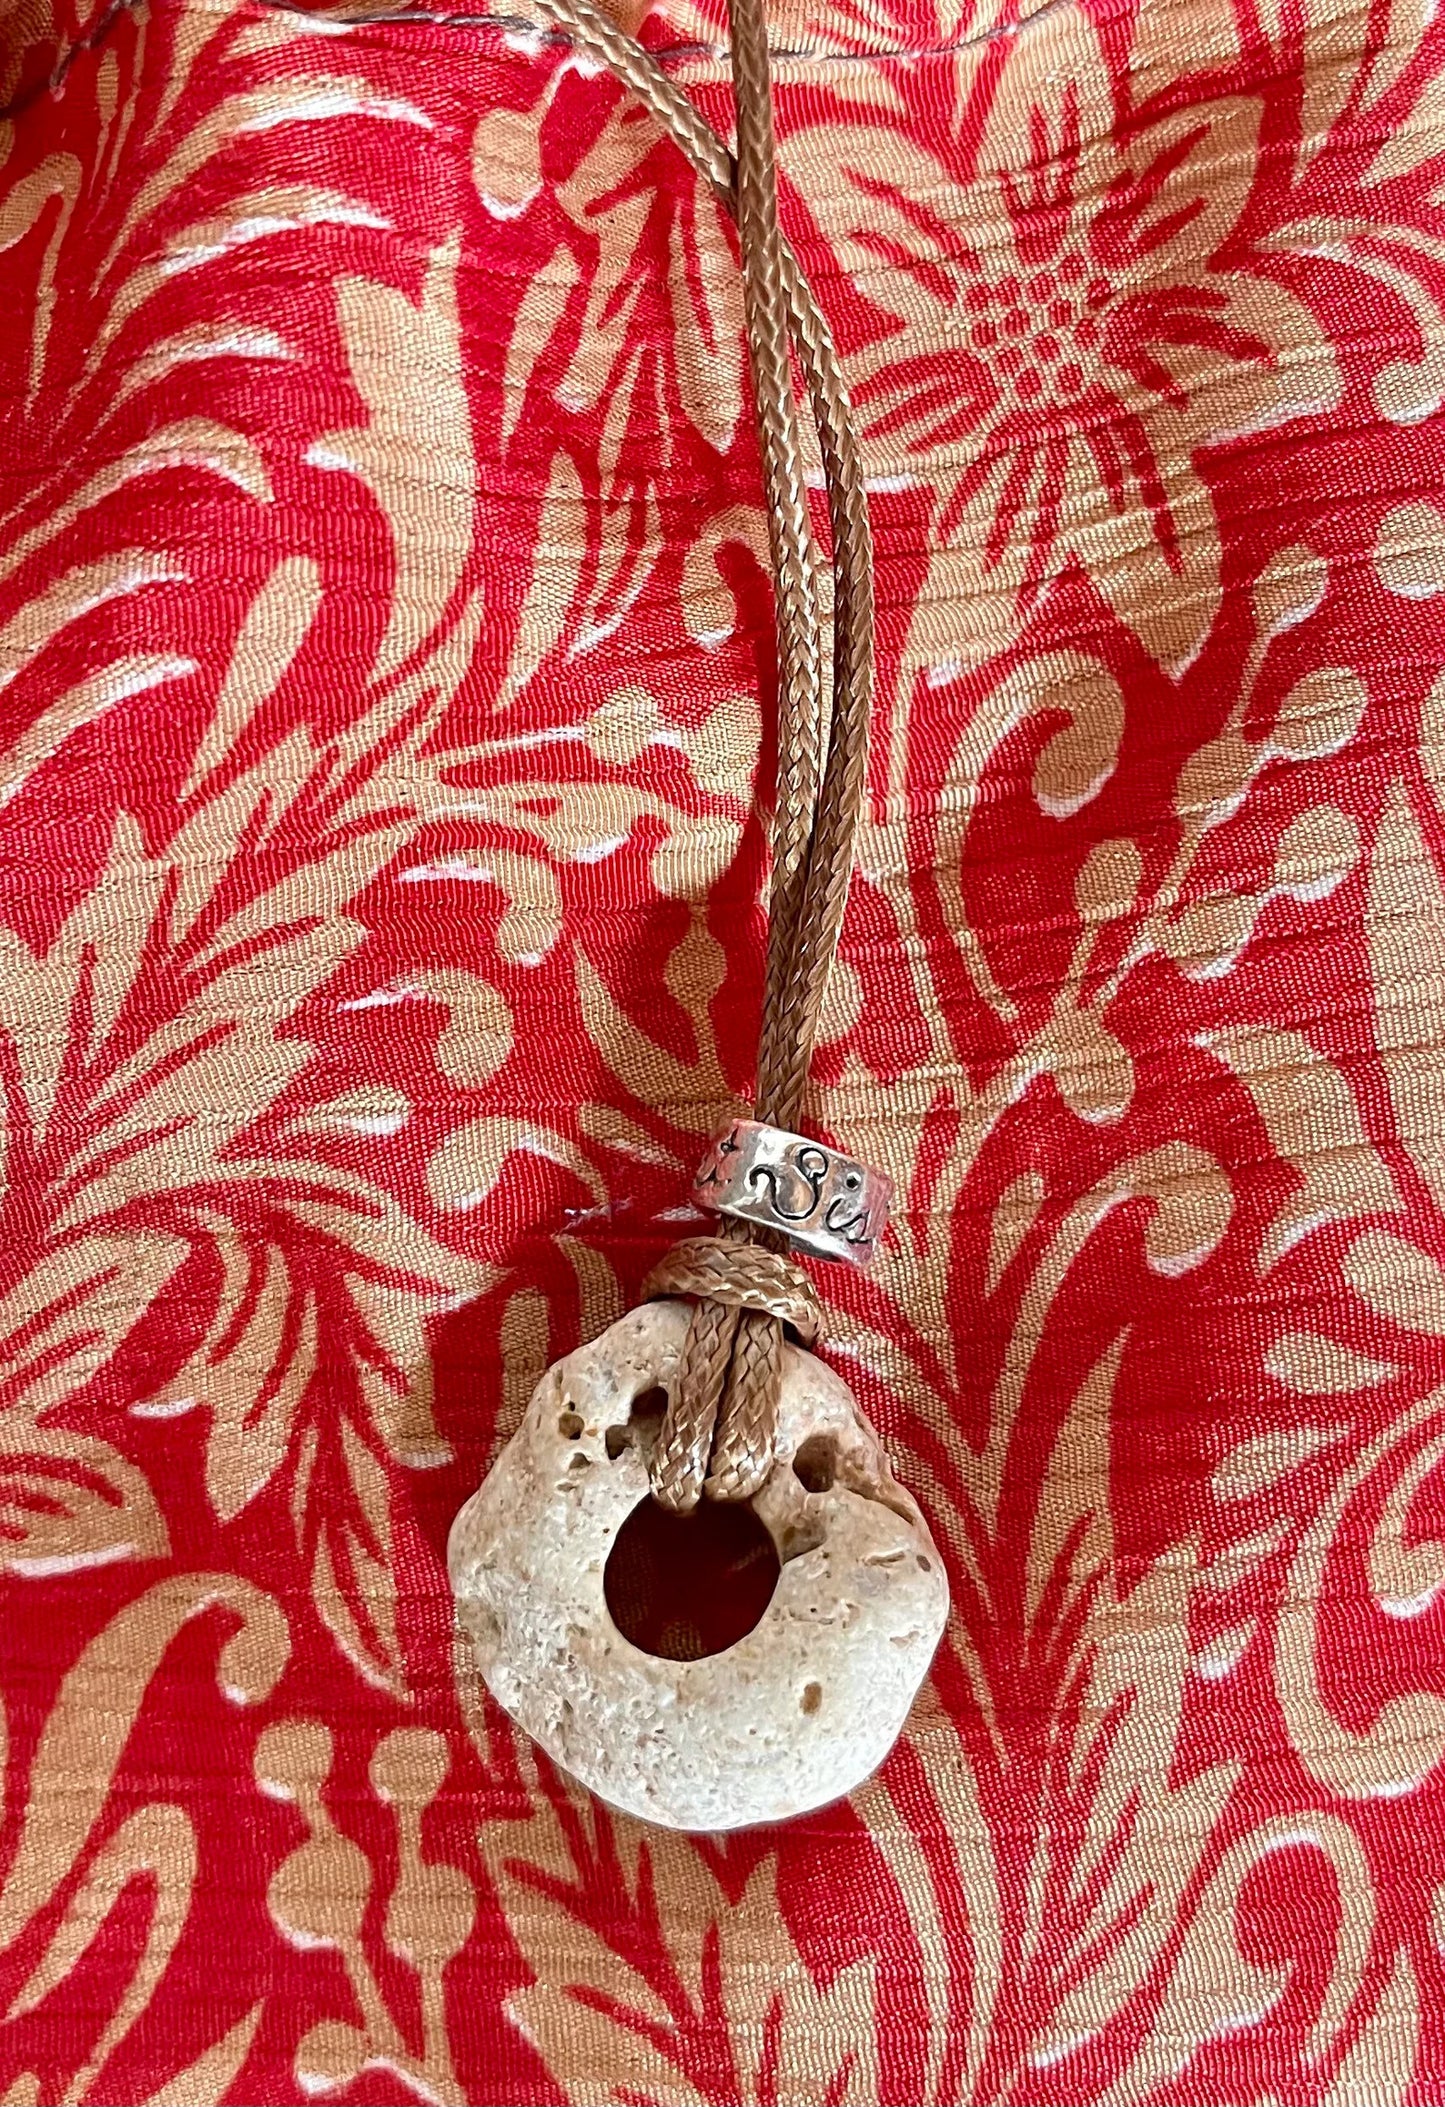 Spirited Bohemian Hag Stone Pendant, Sister Gift, Hand Crafted Artisan Silver Bead, Bodhi Jewelry